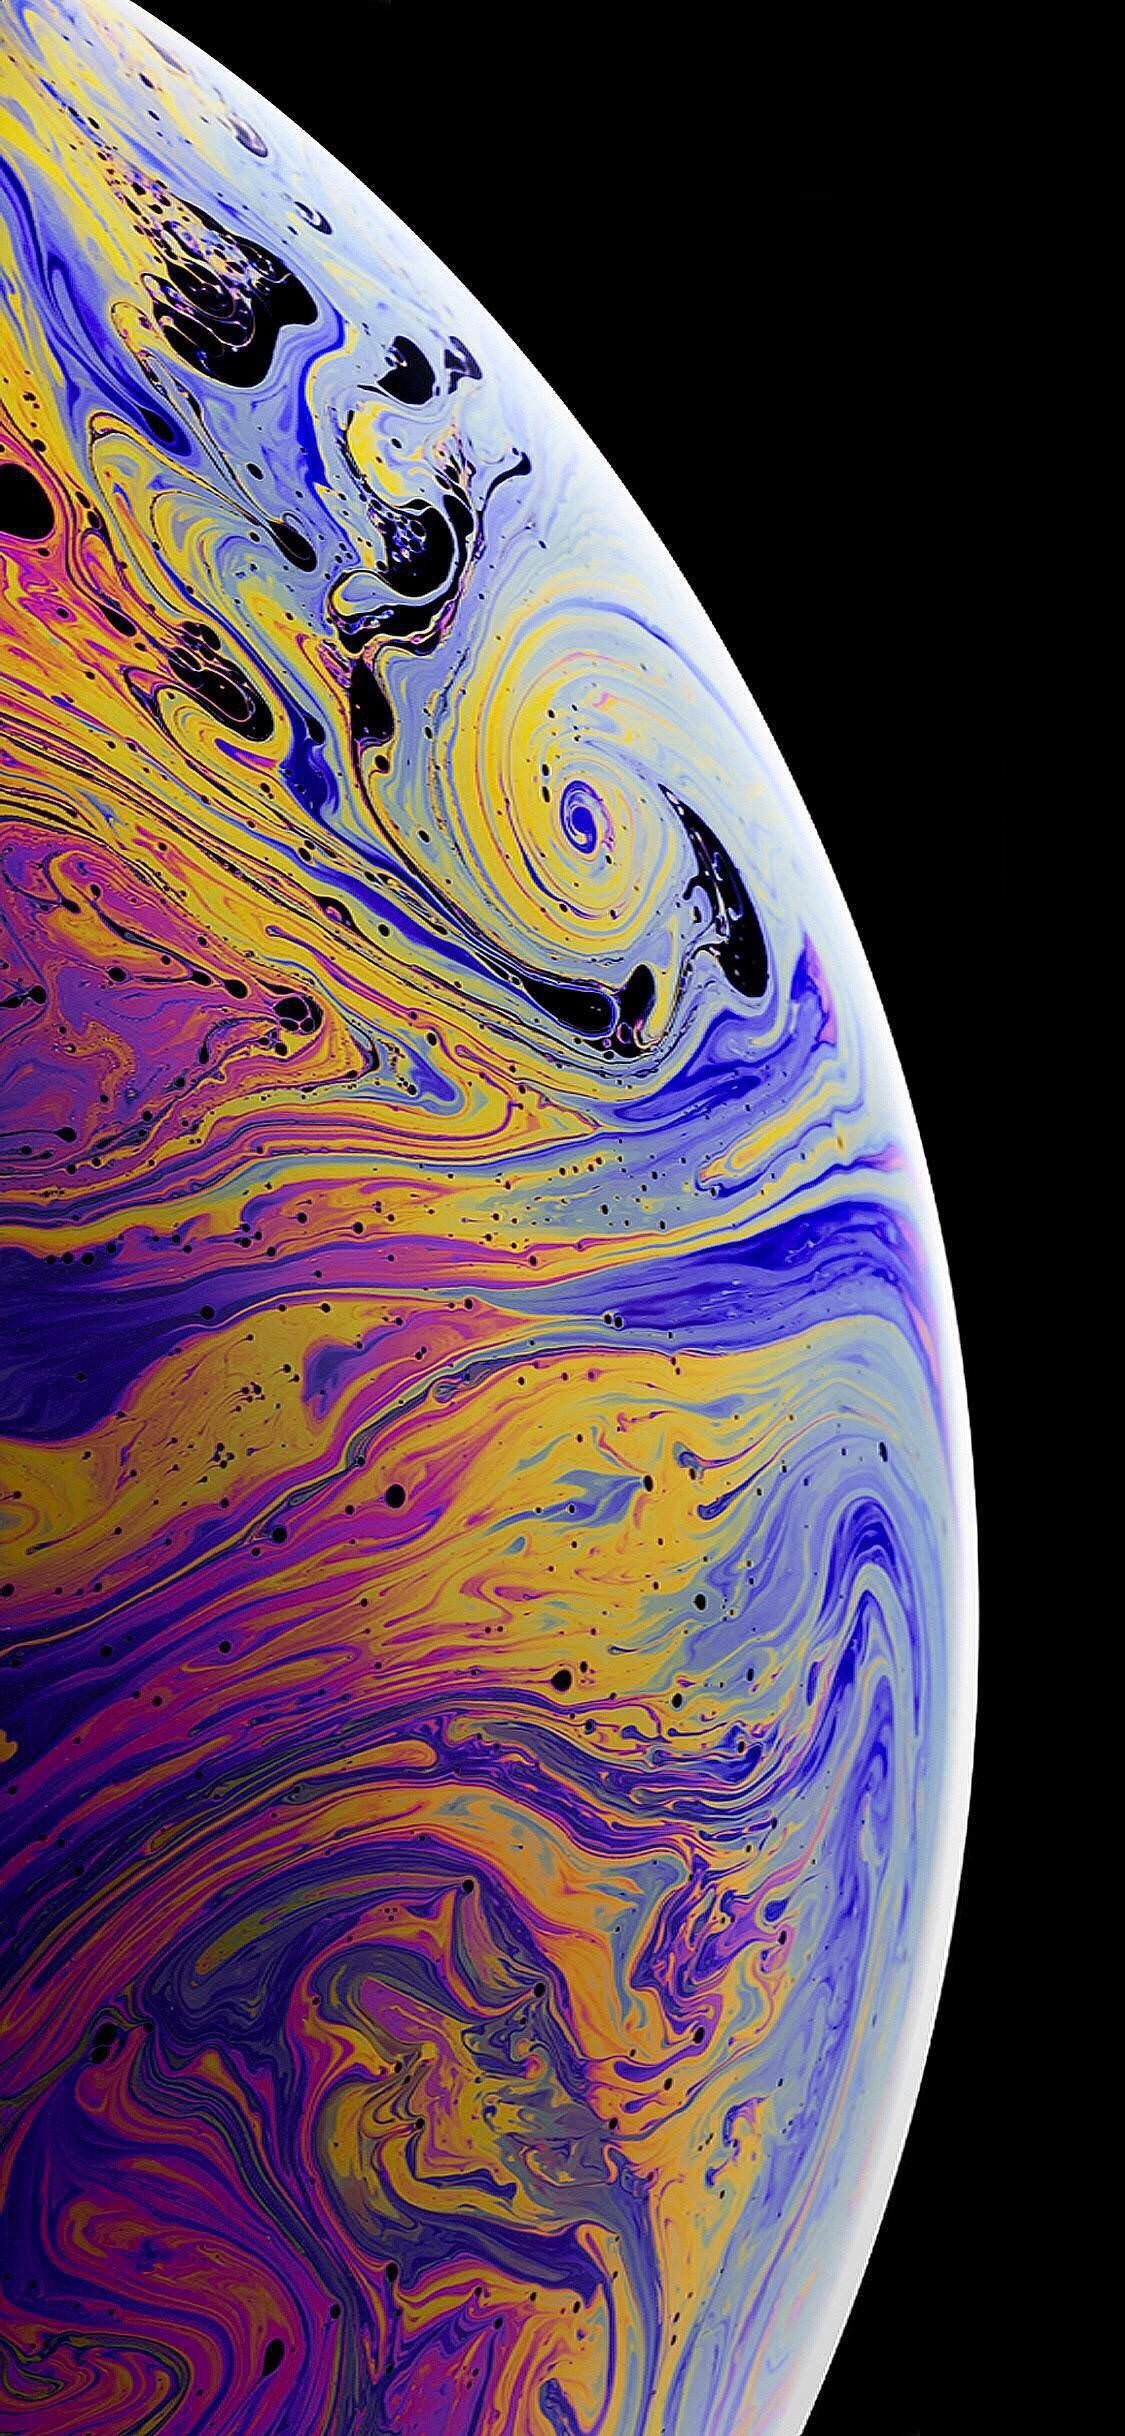 1125X2436 Iphone X Wallpapers